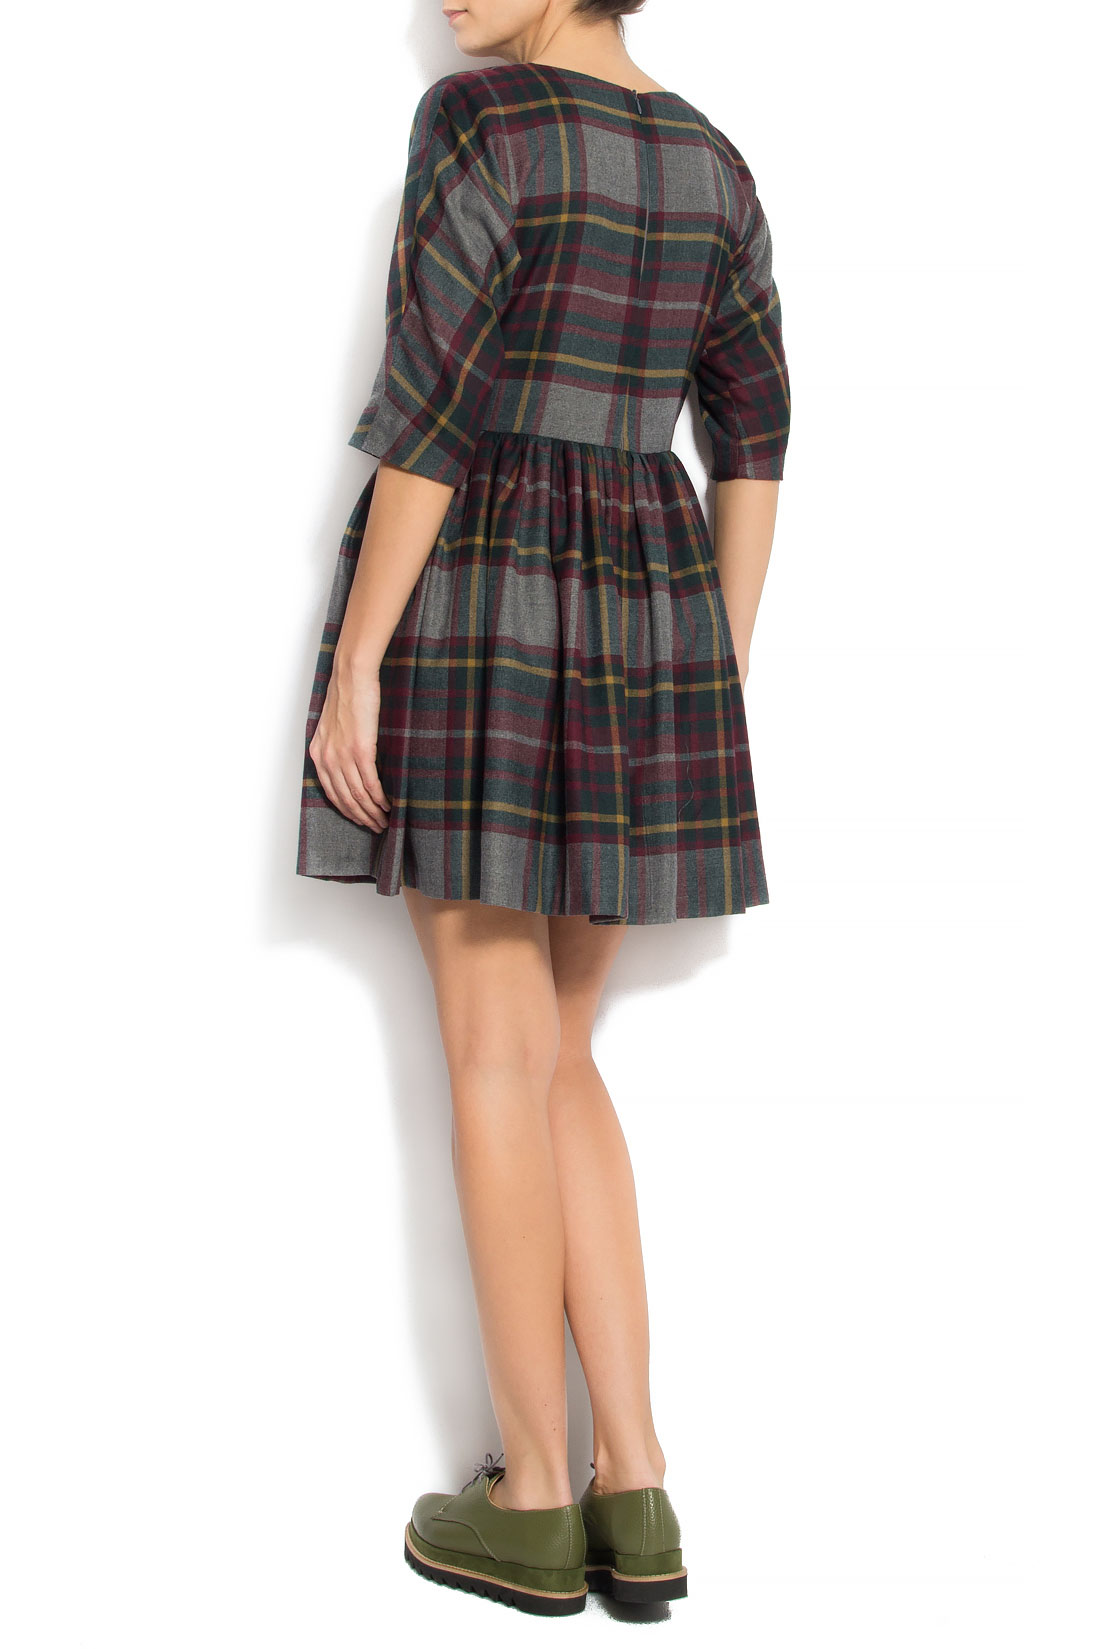 Checked wool mini dress Claudia Castrase image 2